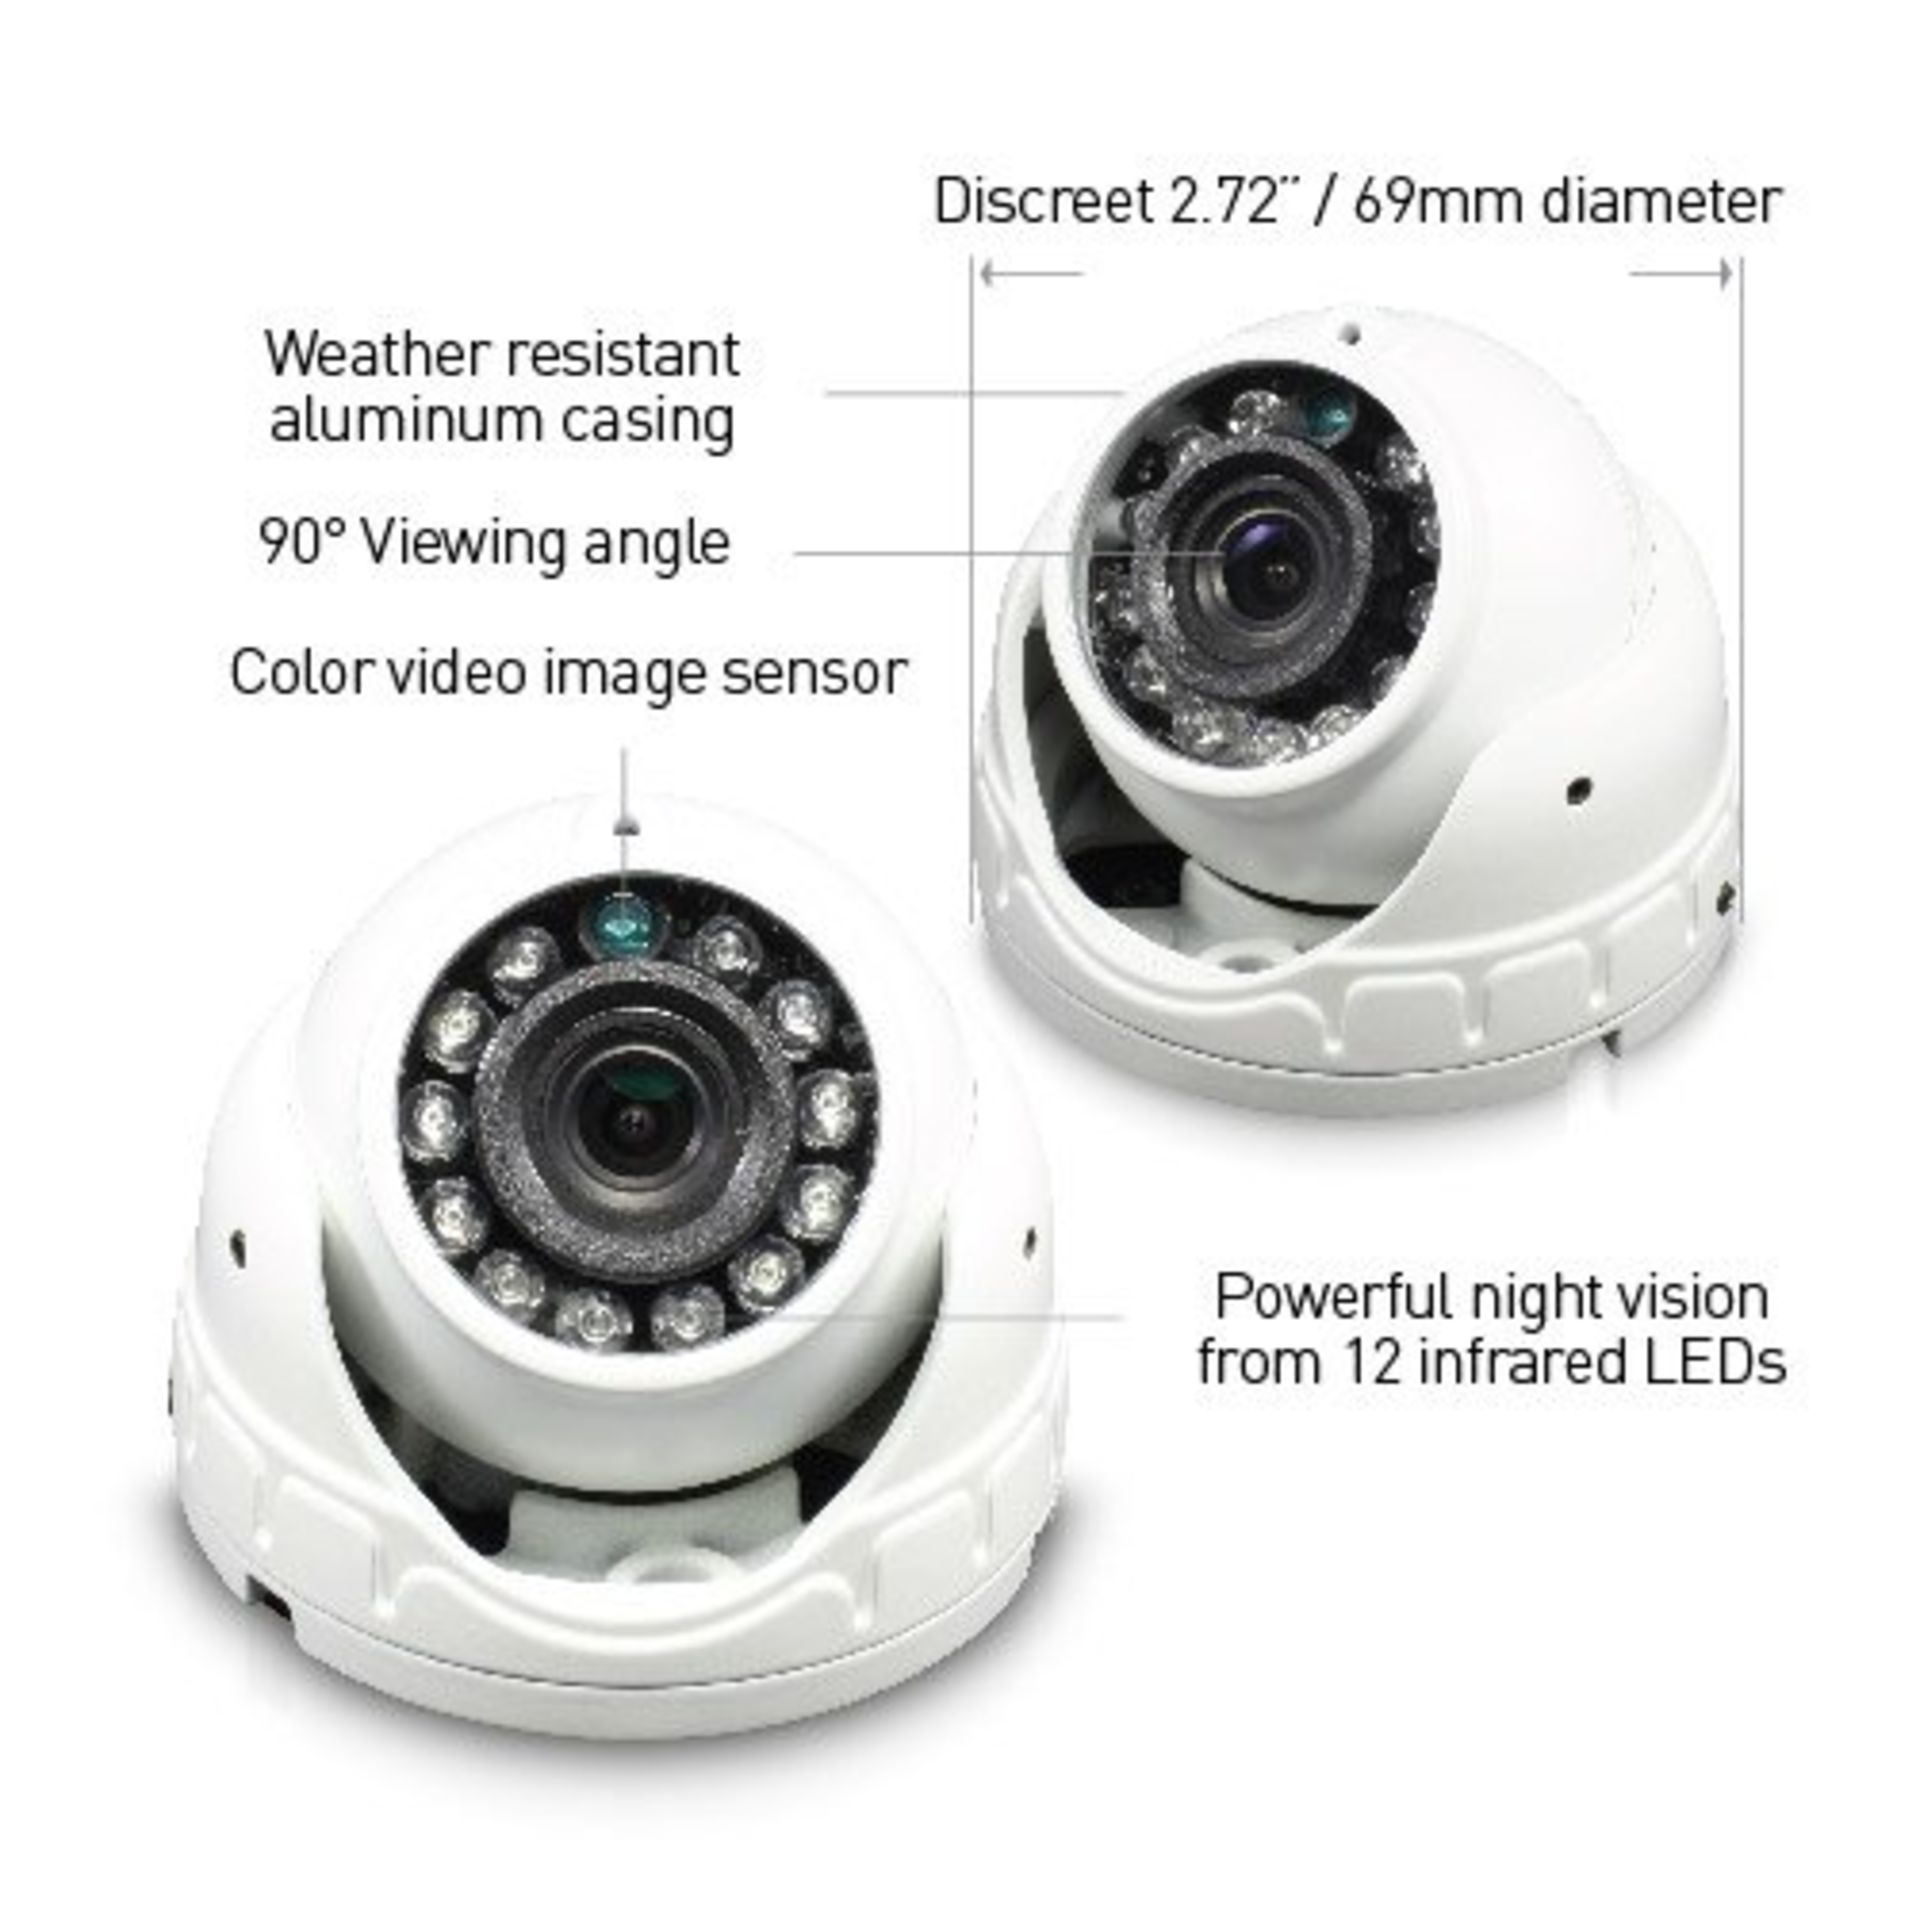 V Grade A/B Swann SW-1080FLD 1080P Dome Security Camera - Weather Resistant Casing- 90 degree